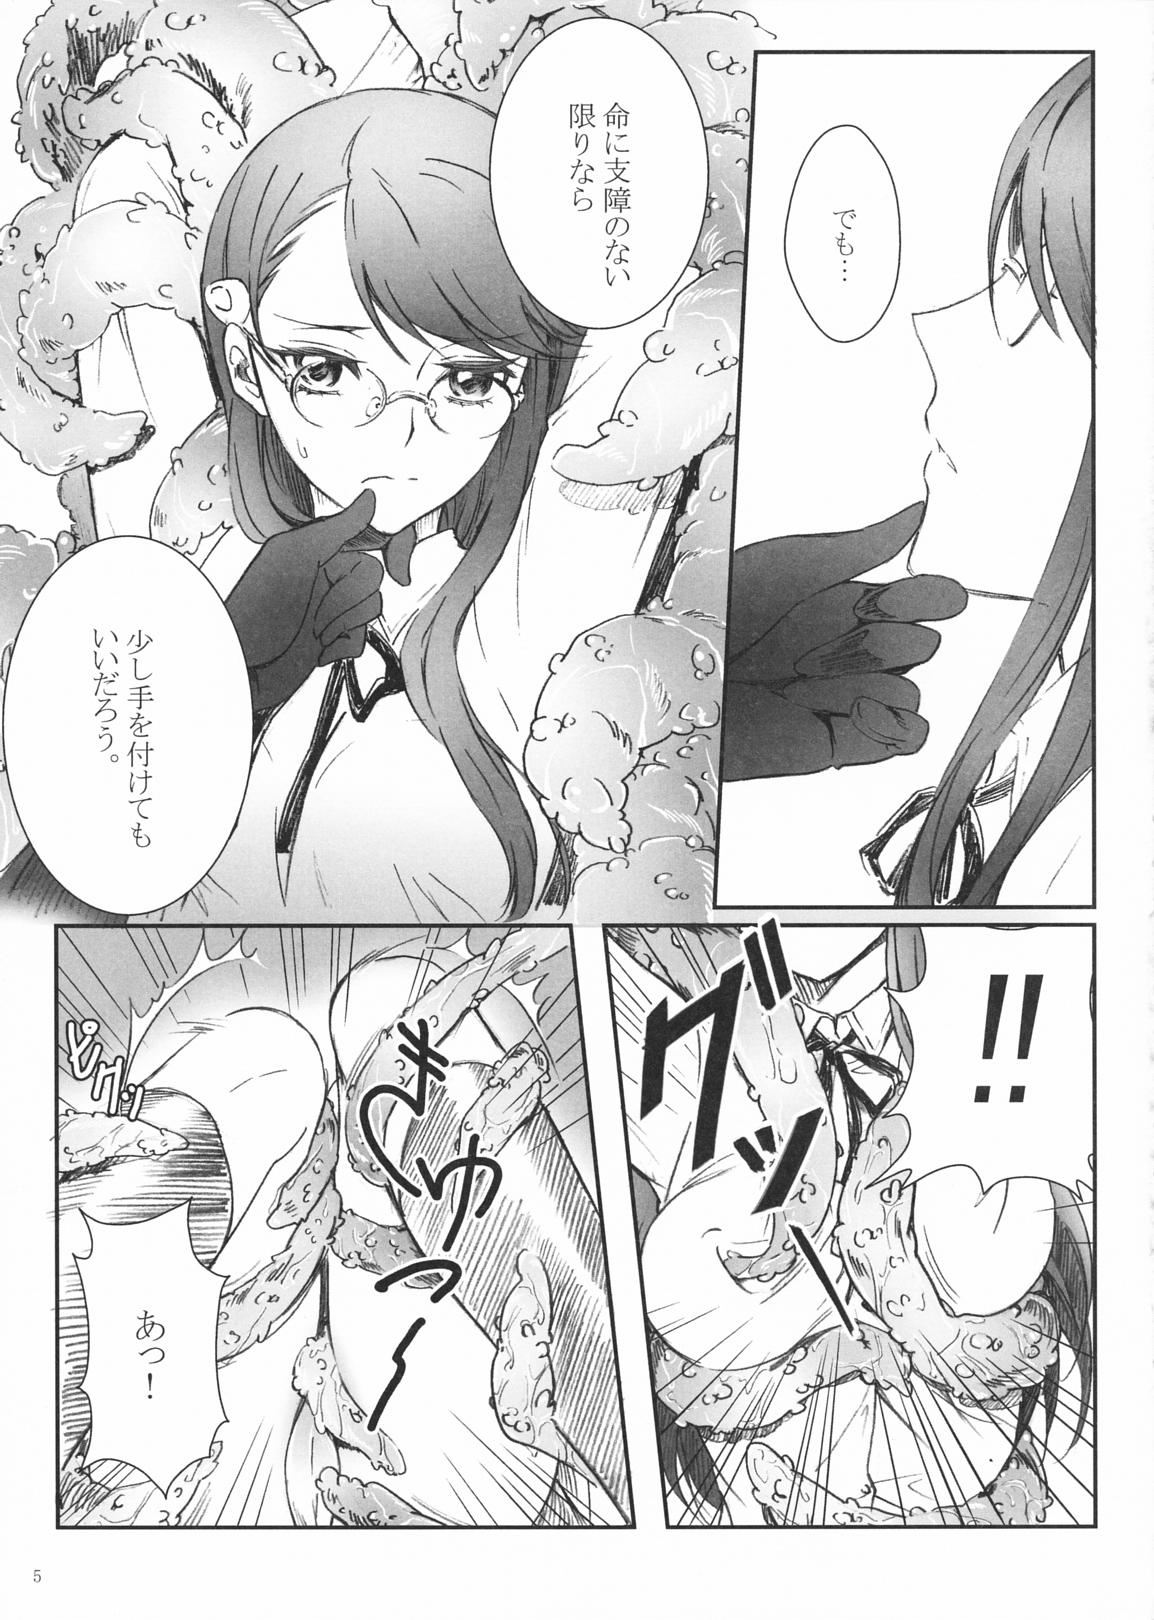 Teenager Eclipse of the MooN - Heartcatch precure Play - Page 7